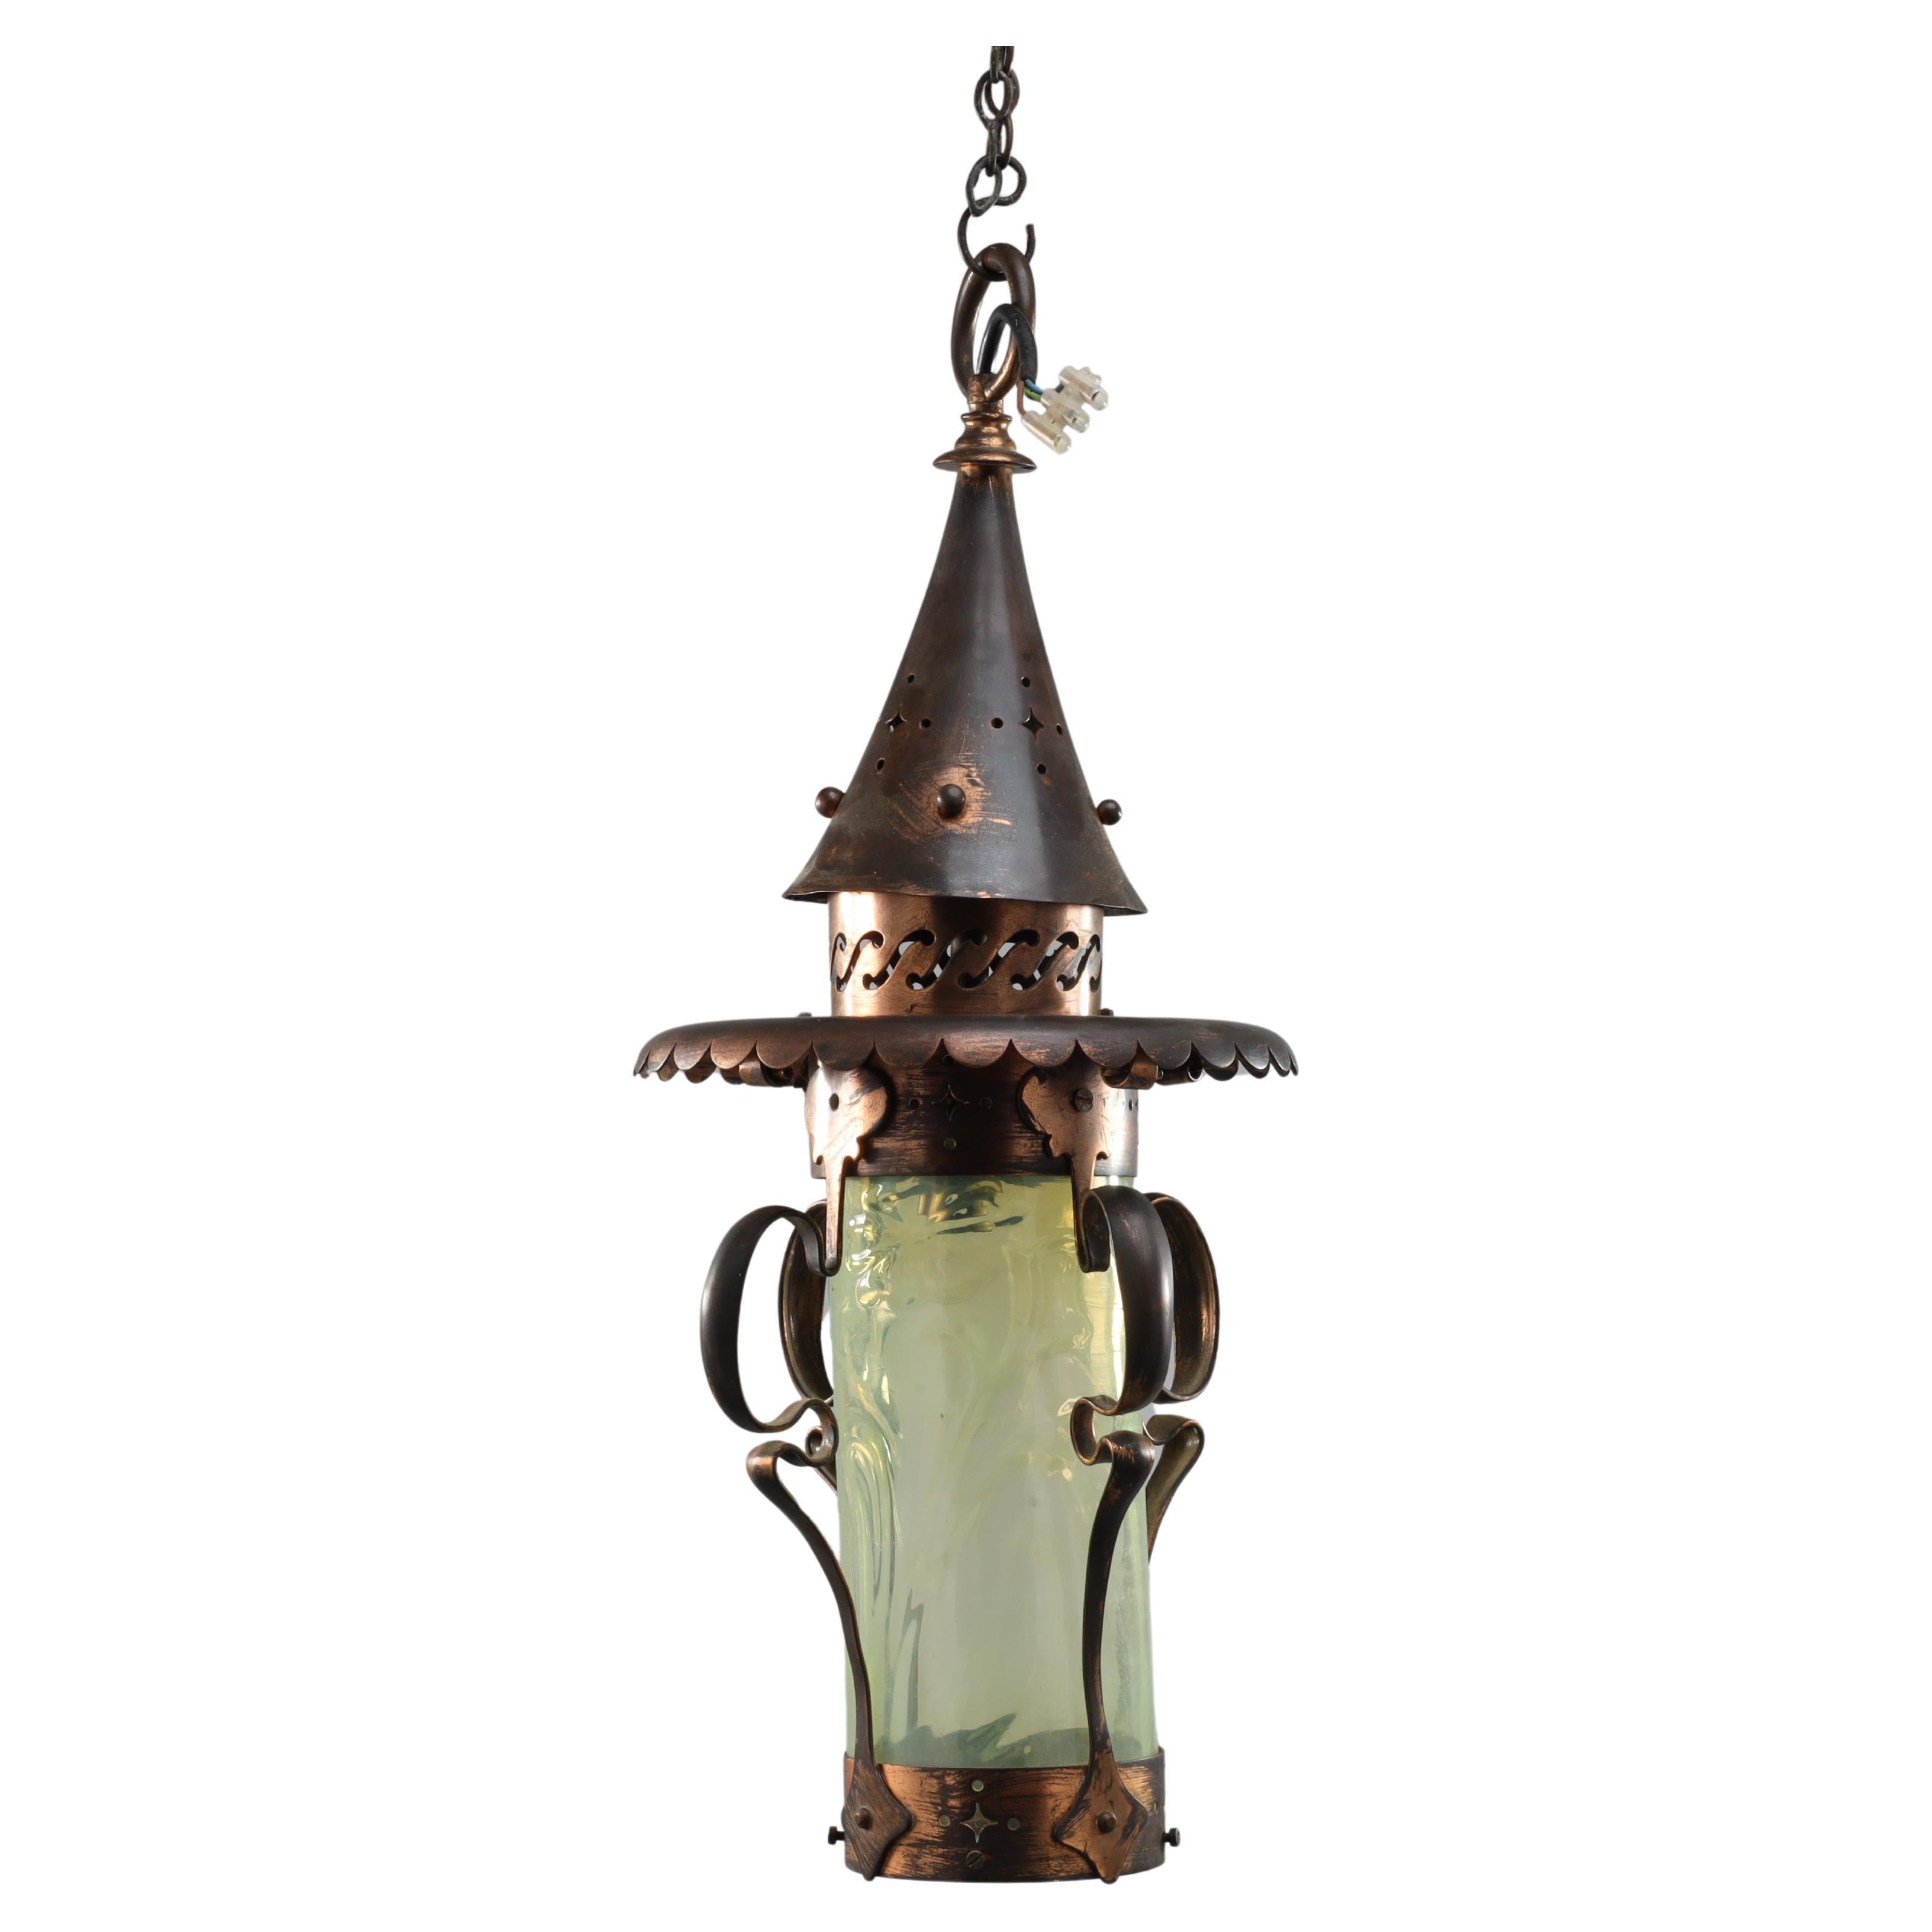 An Arts and Crafts copper & Vaseline lantern with floral flowing decoration